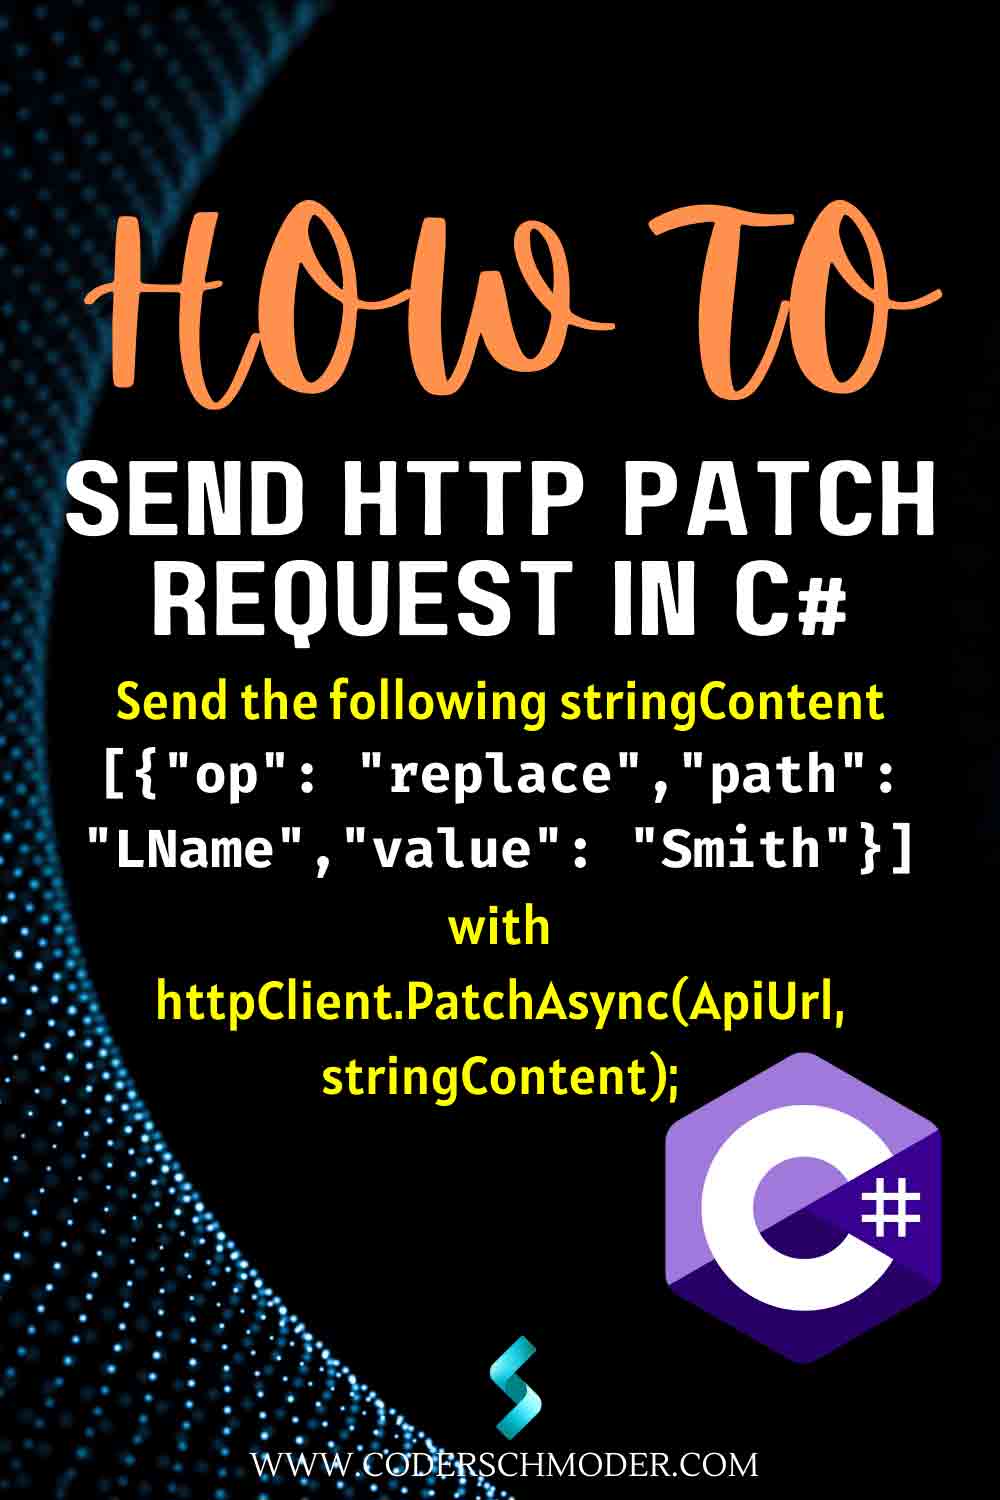 How to Send a Http Patch Request in C#